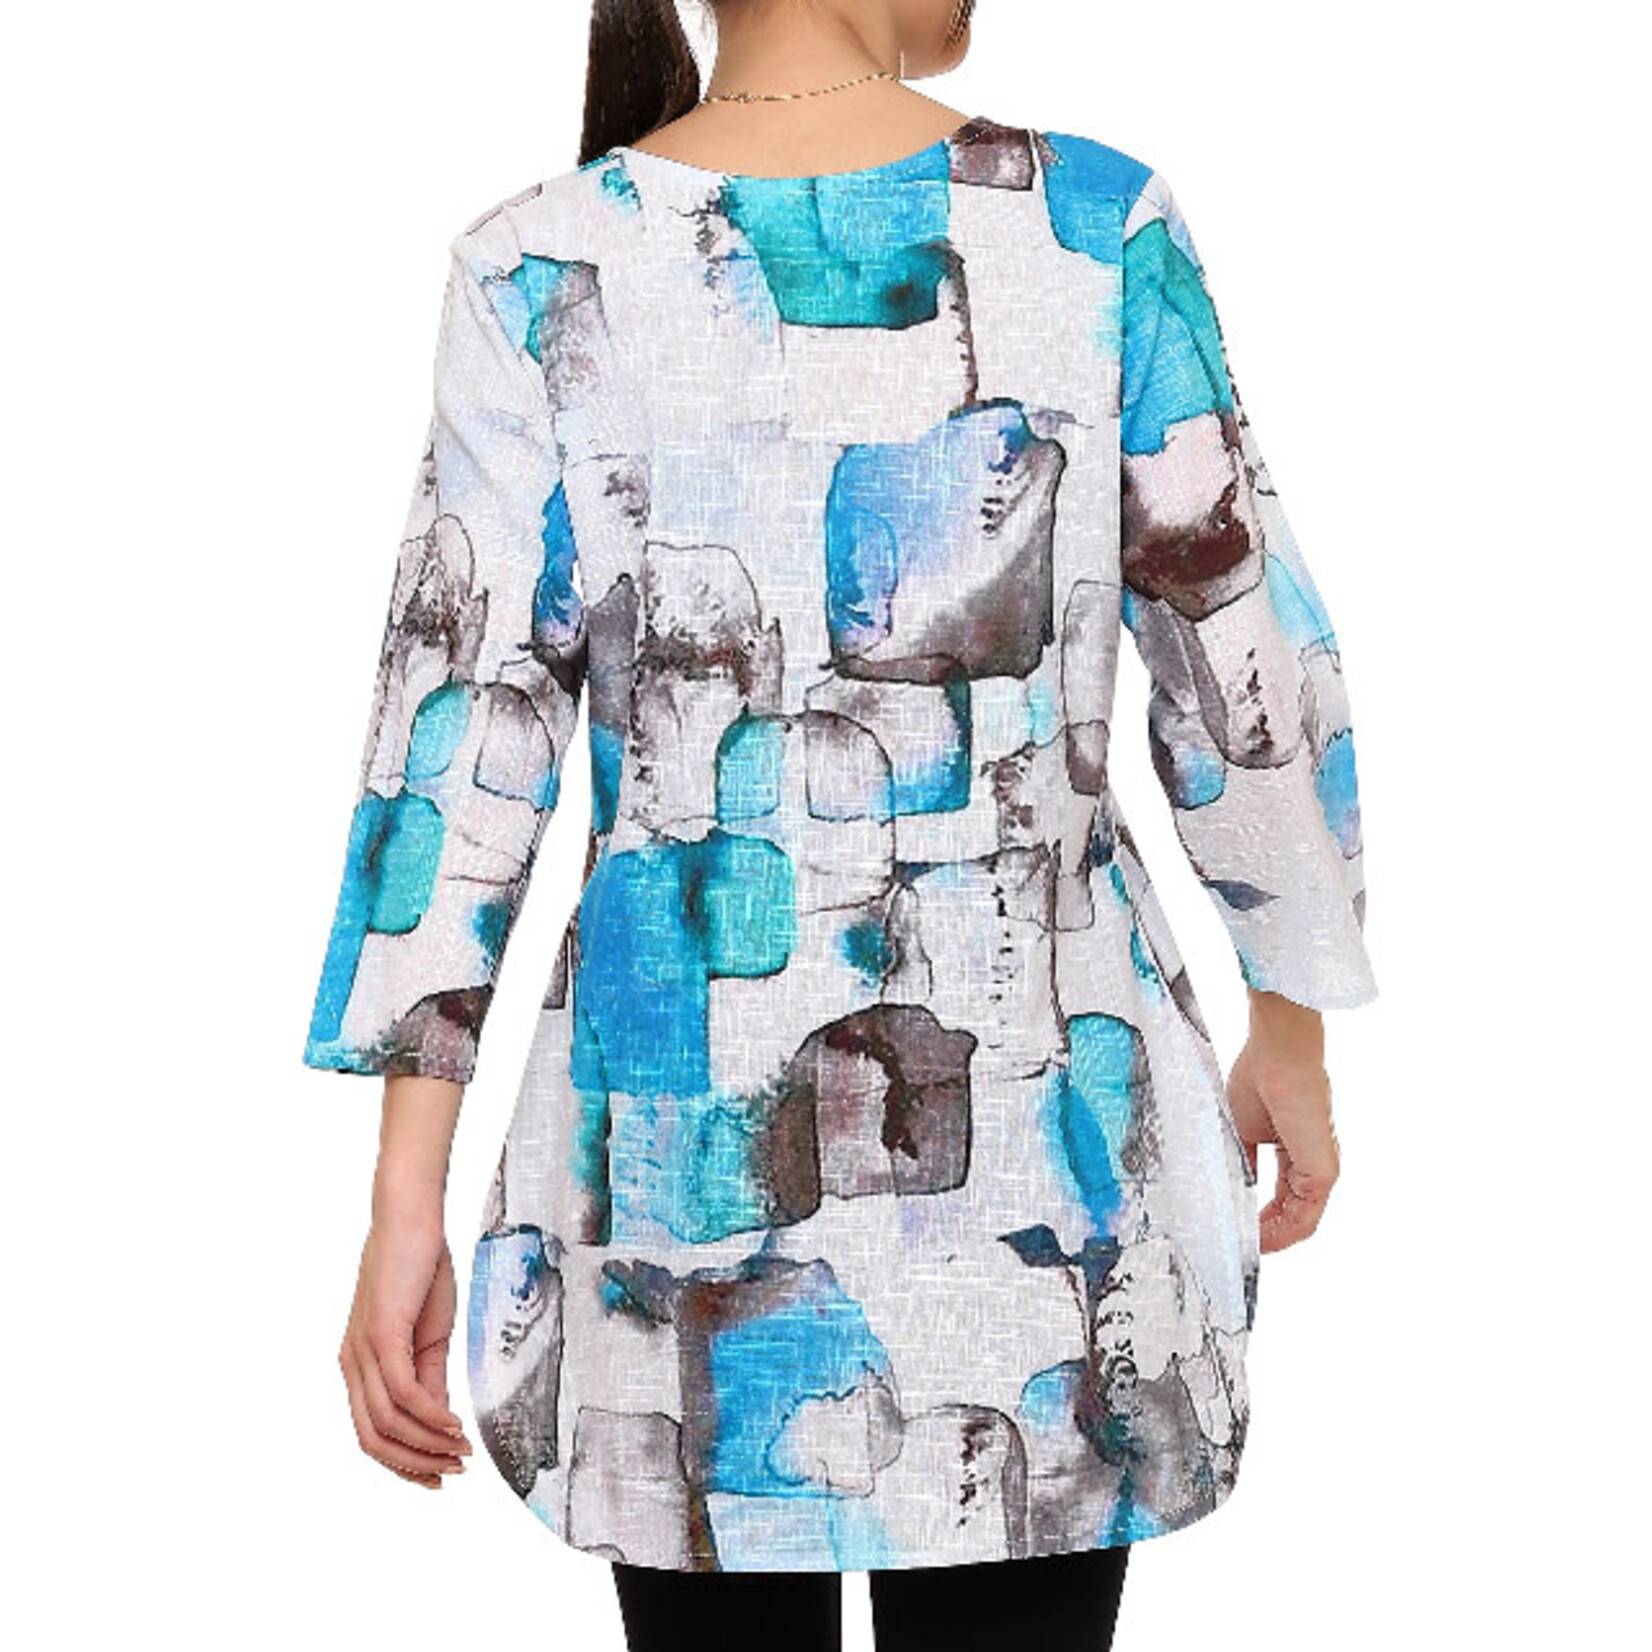 Parsley and Sage Turquoise Watercolor Cotton Tunic